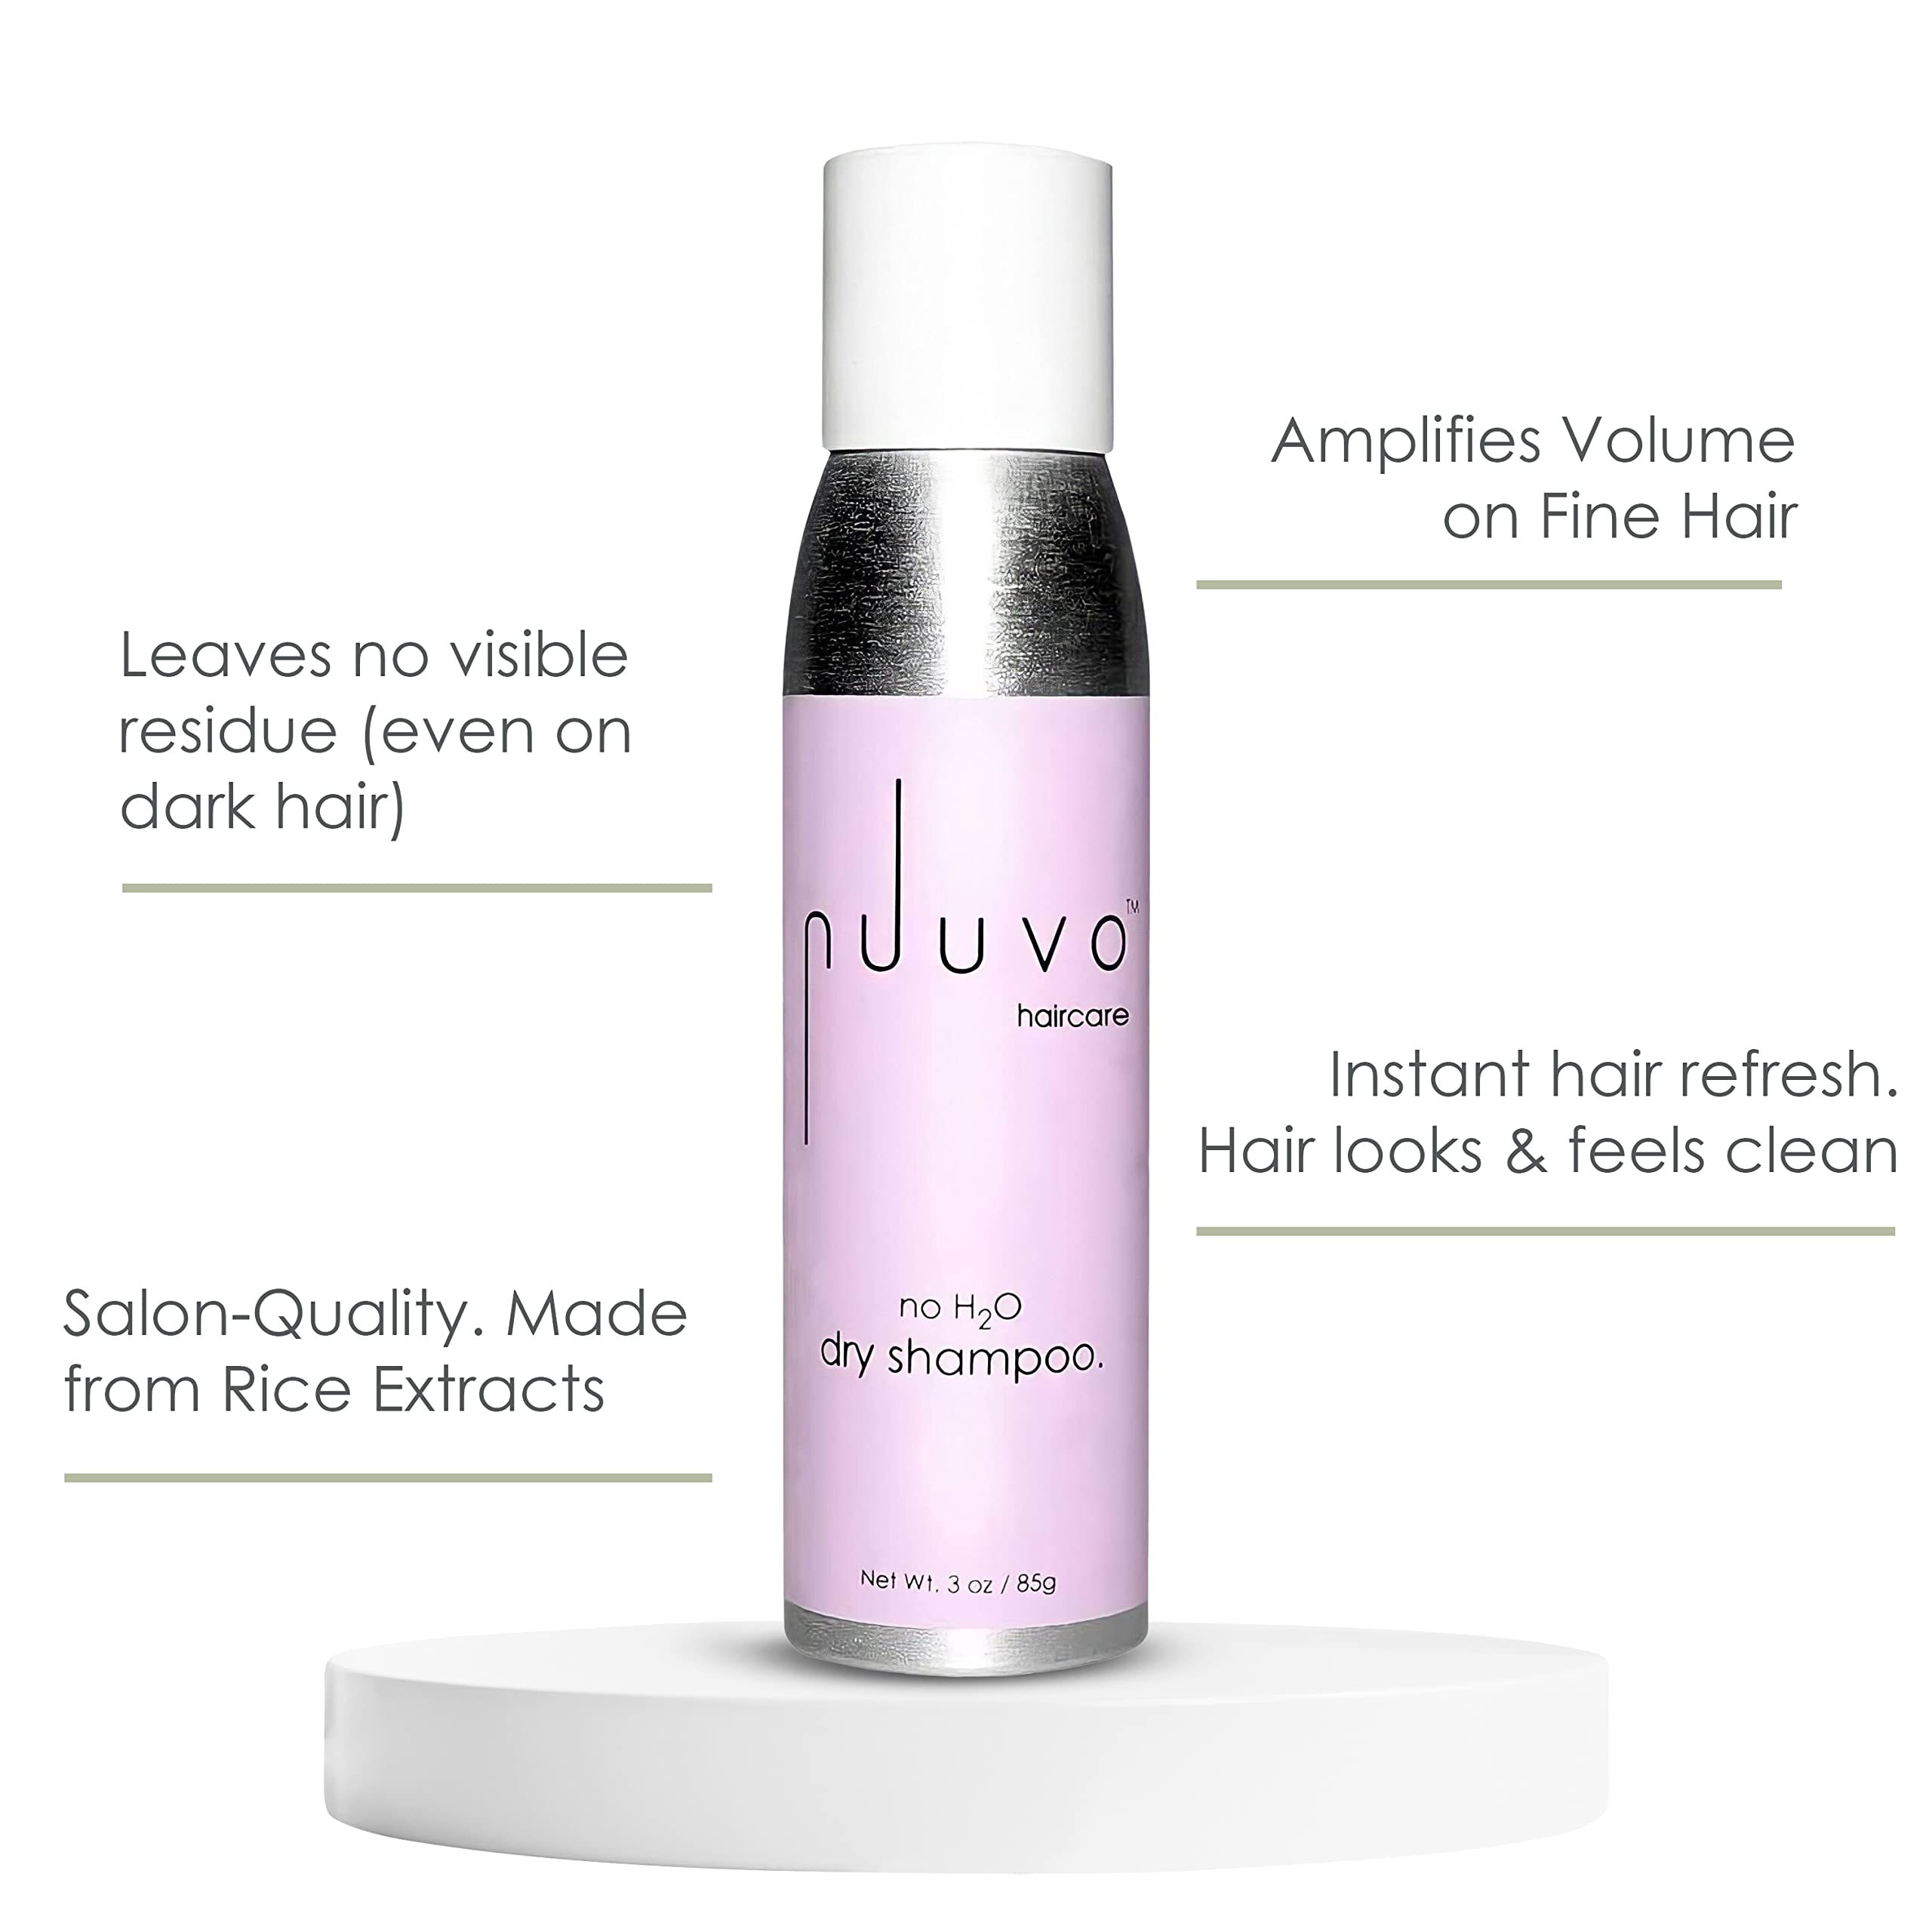 Nuuvo Haircare Dry Shampoo for Women & Men - 3oz, Instant Hair Refresh & Cleanse, Volumizing Dry Shampoo for Fine Hair – Salon-Quality, Made With Rice Extracts